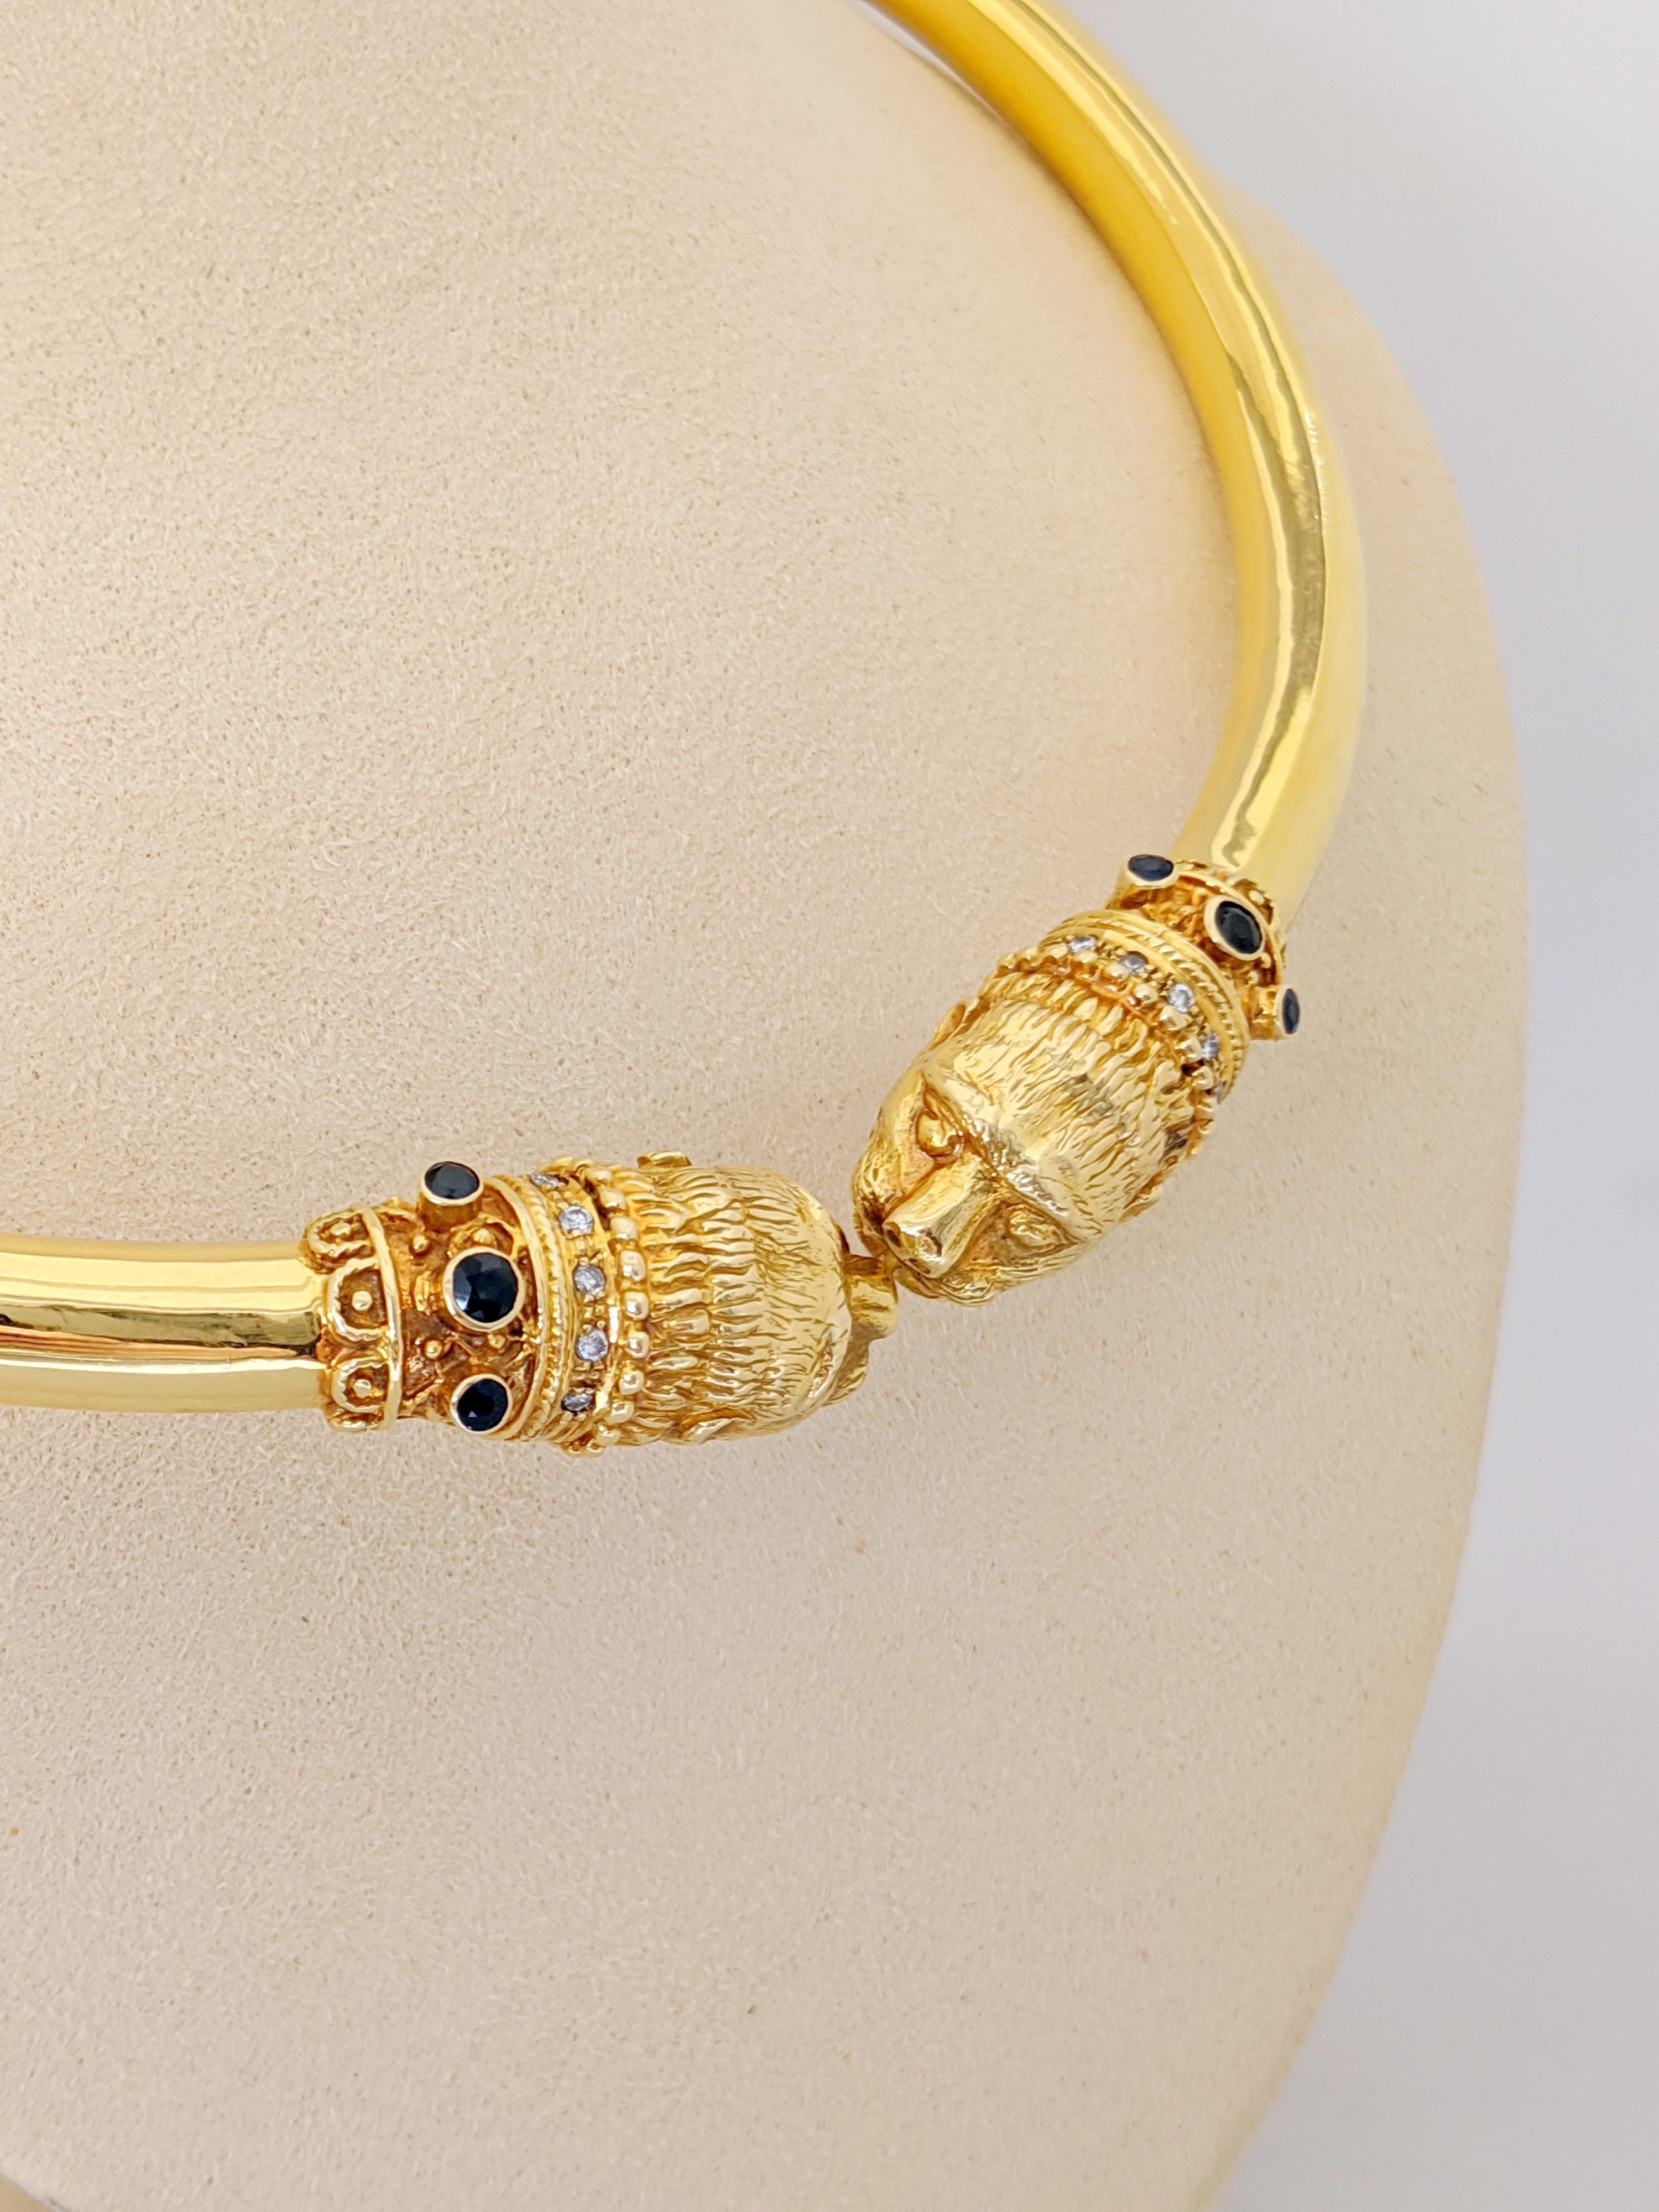 This 18 karat yellow gold choker was designed by Zolotas of Athens , Greece. Founded in 1895 the company merges Greek heritage with modern style to create these timeless pieces. Coveted by Royals and Actresses.
The choker is designed with two